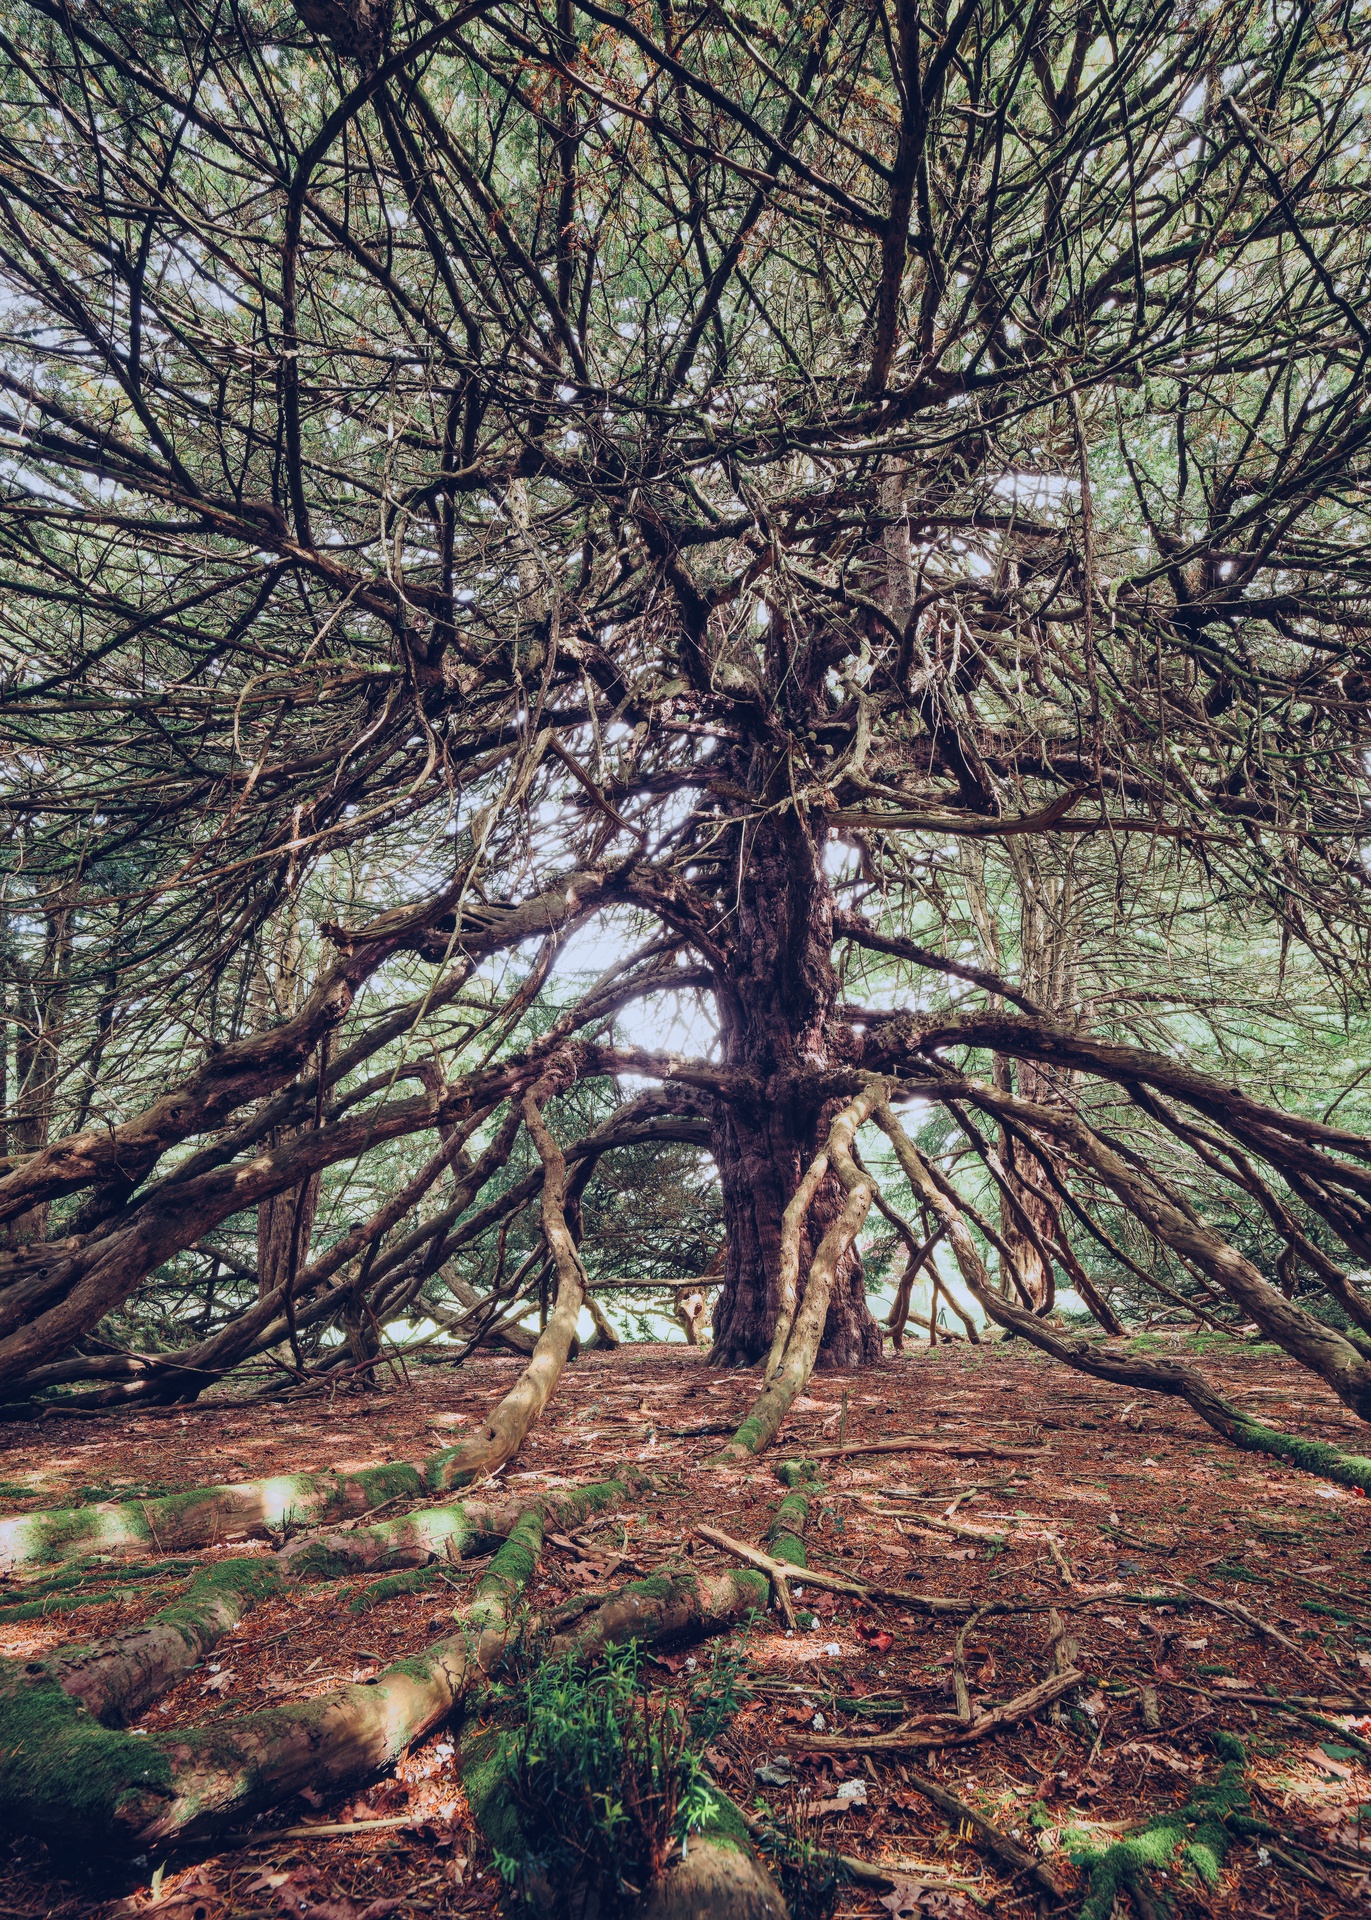 The Broich Yew